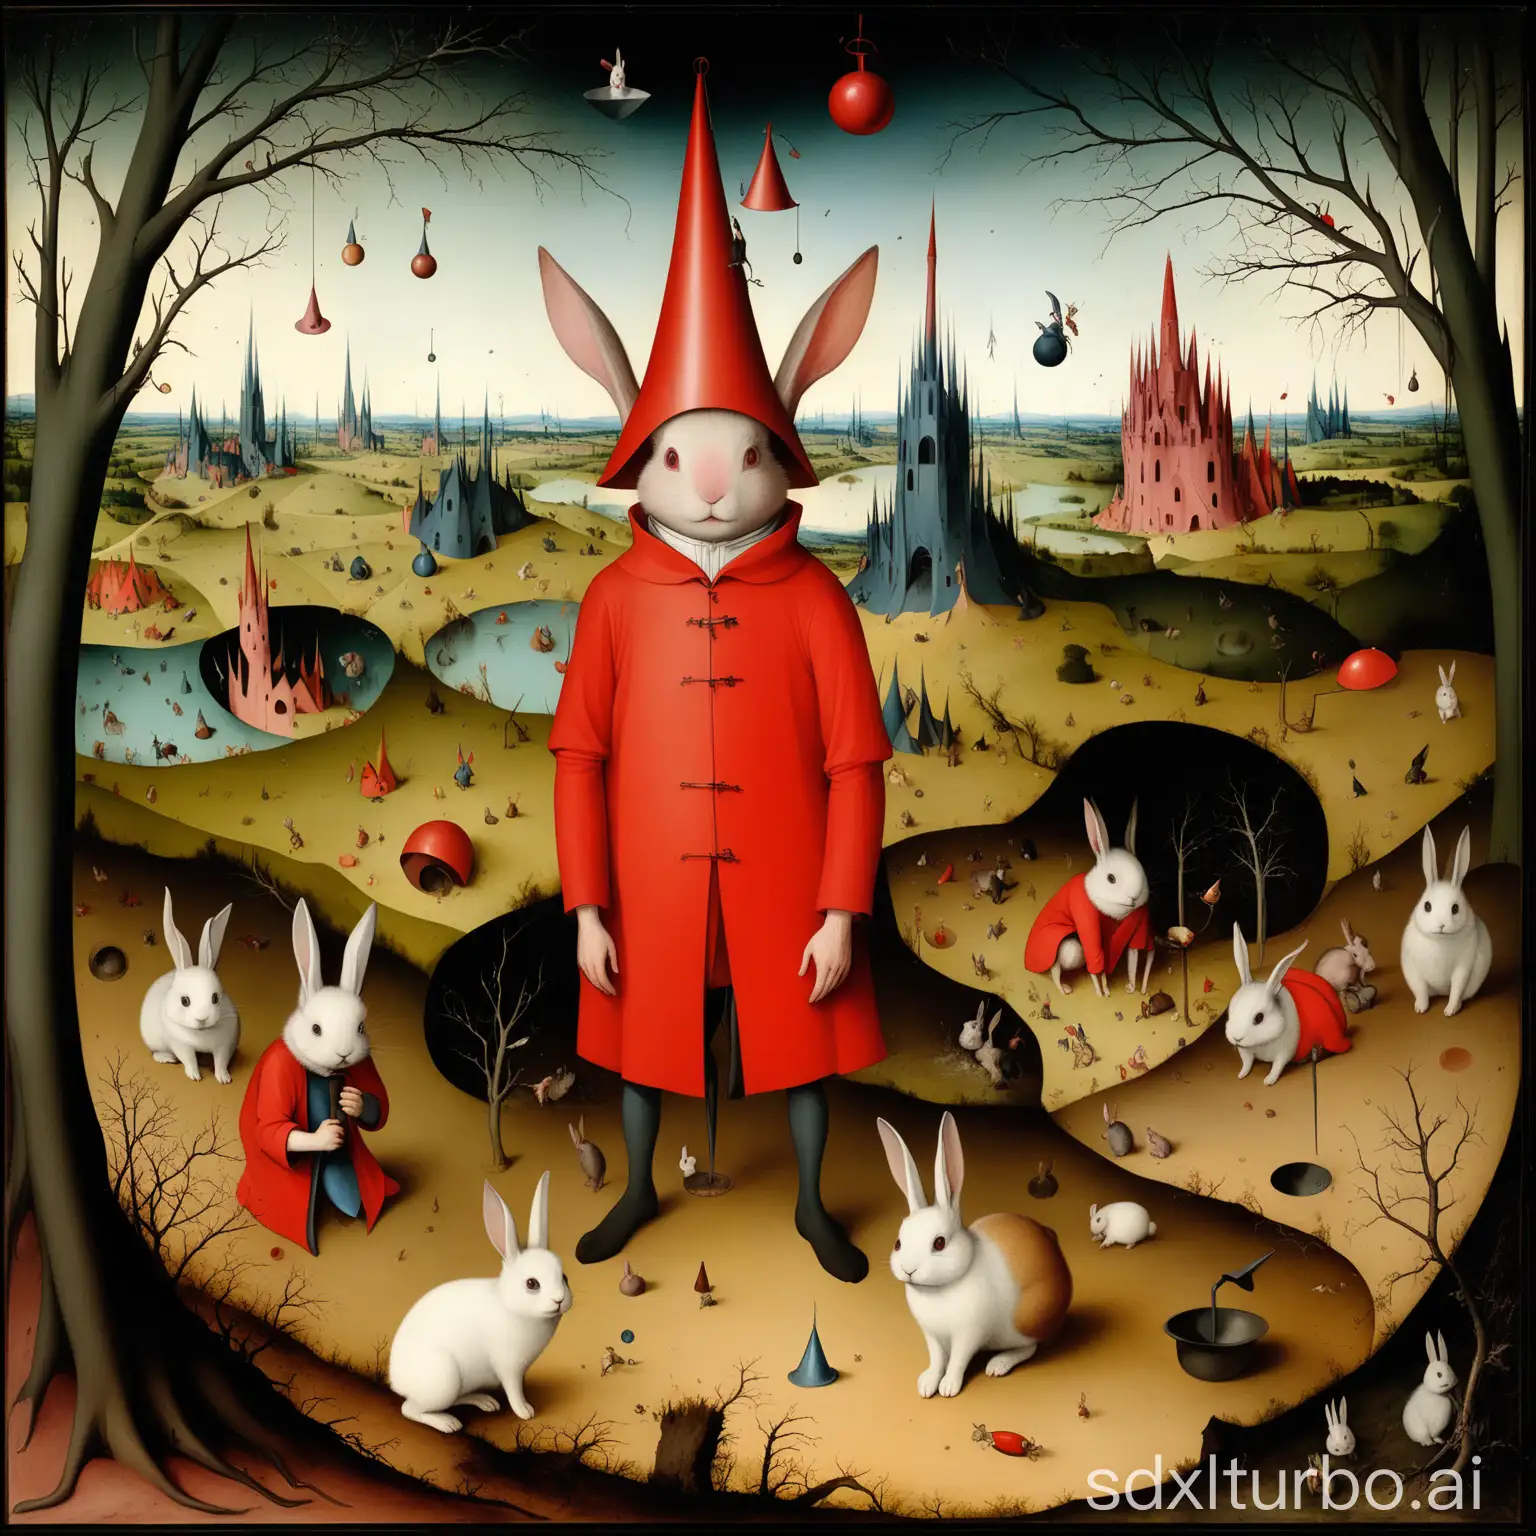 In a landscape like in a picture by Hironimus Bosch, a small animal with rabbit's feet and a funnel on its head stands, the eyes look mischievously out from underneath, it wears a red cylindrical coat, in the surrounding of this main actor are still some dry branches that have become males